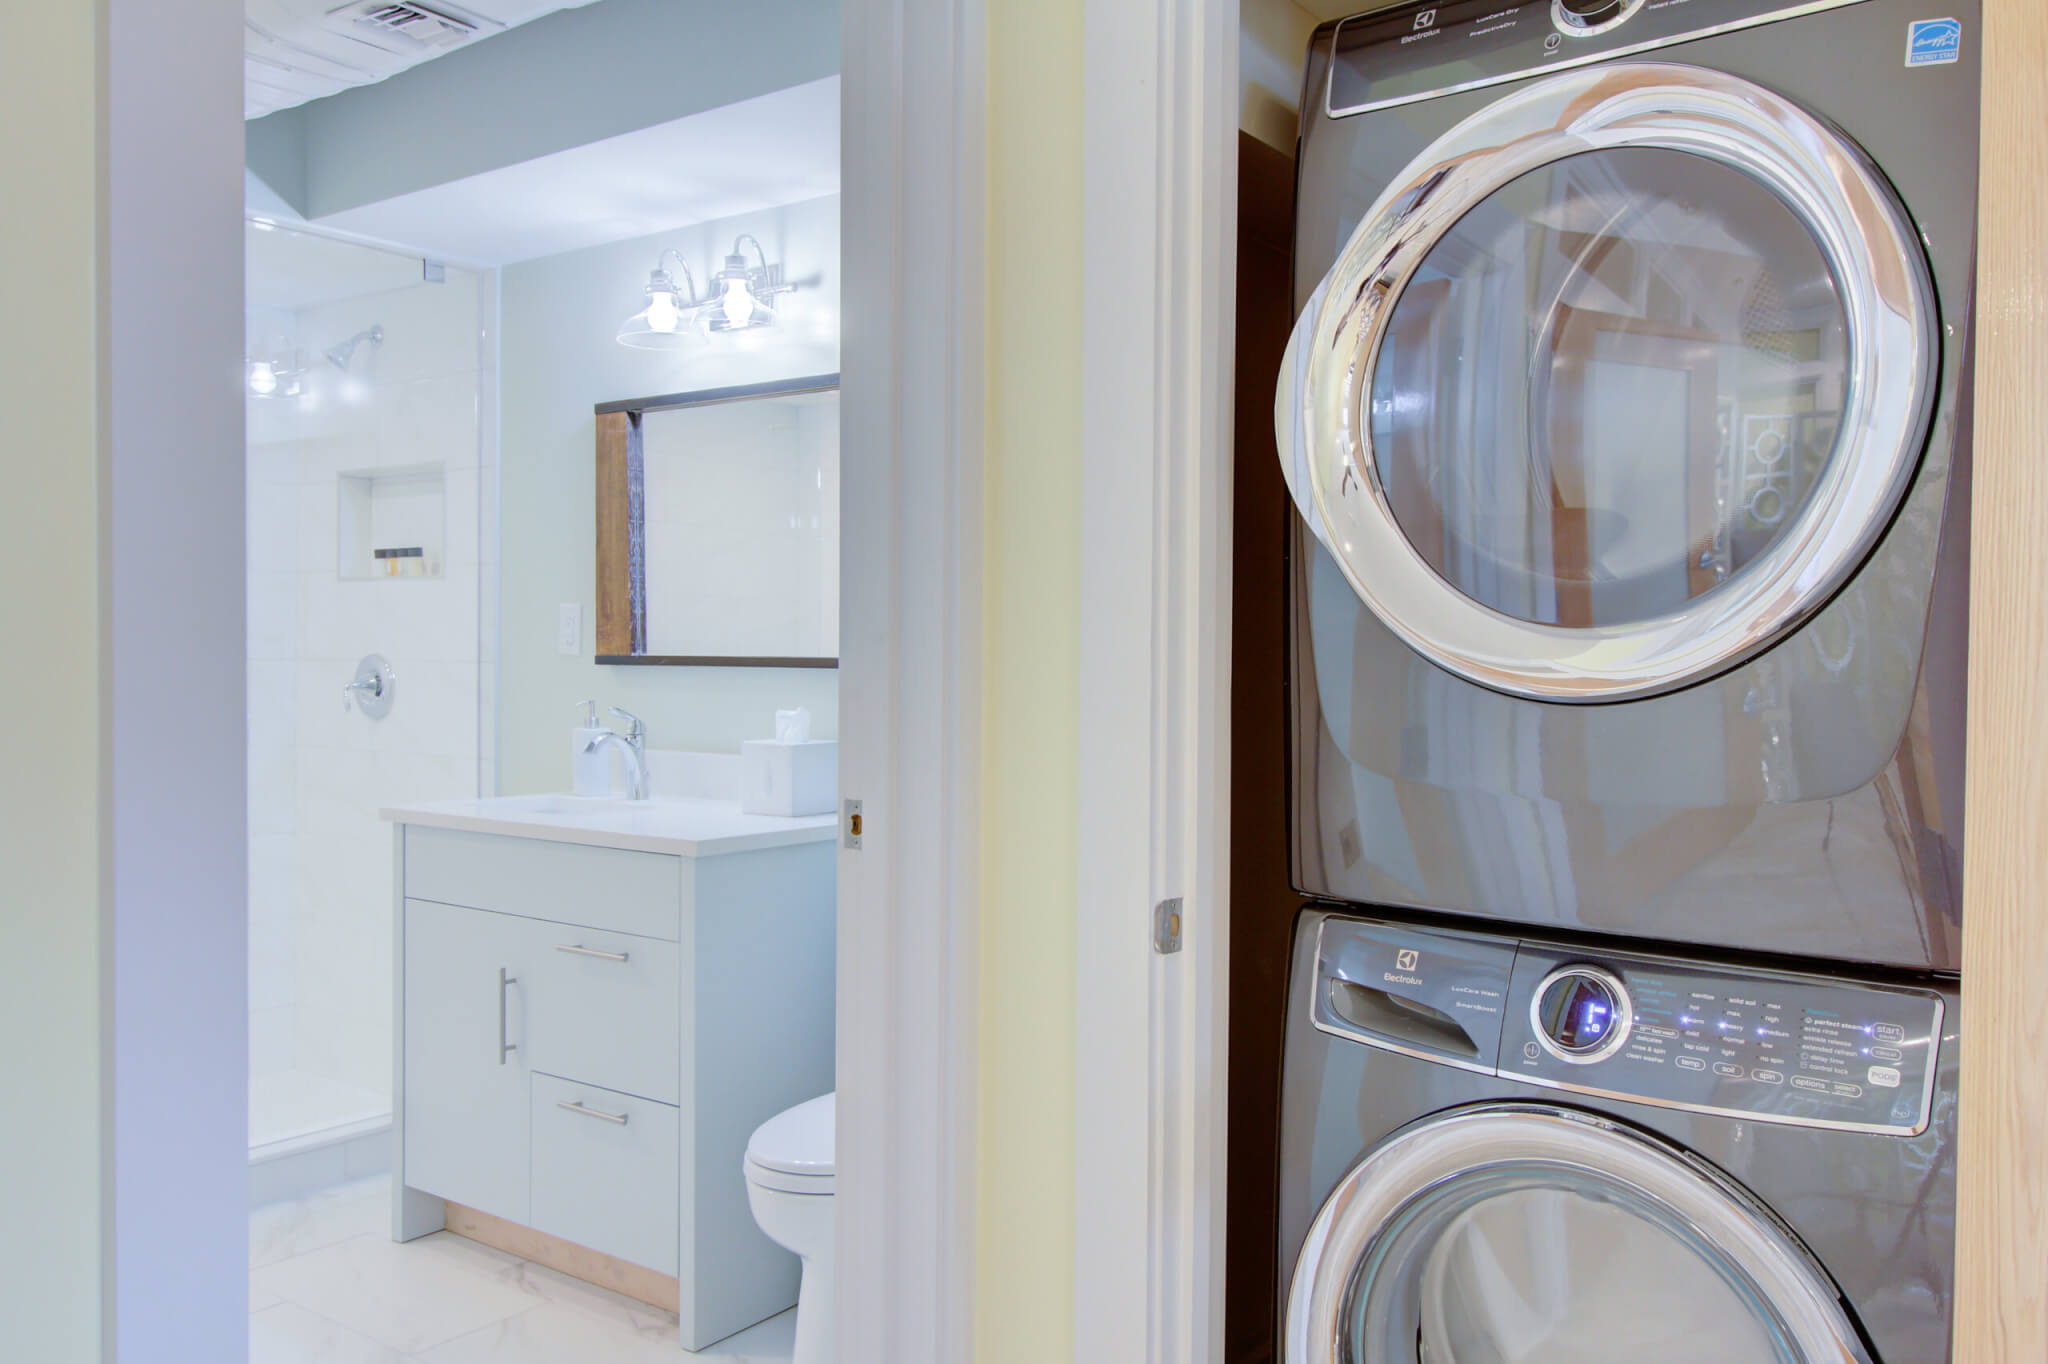 All Suites Have Washer and Dryer with Detergent Provided